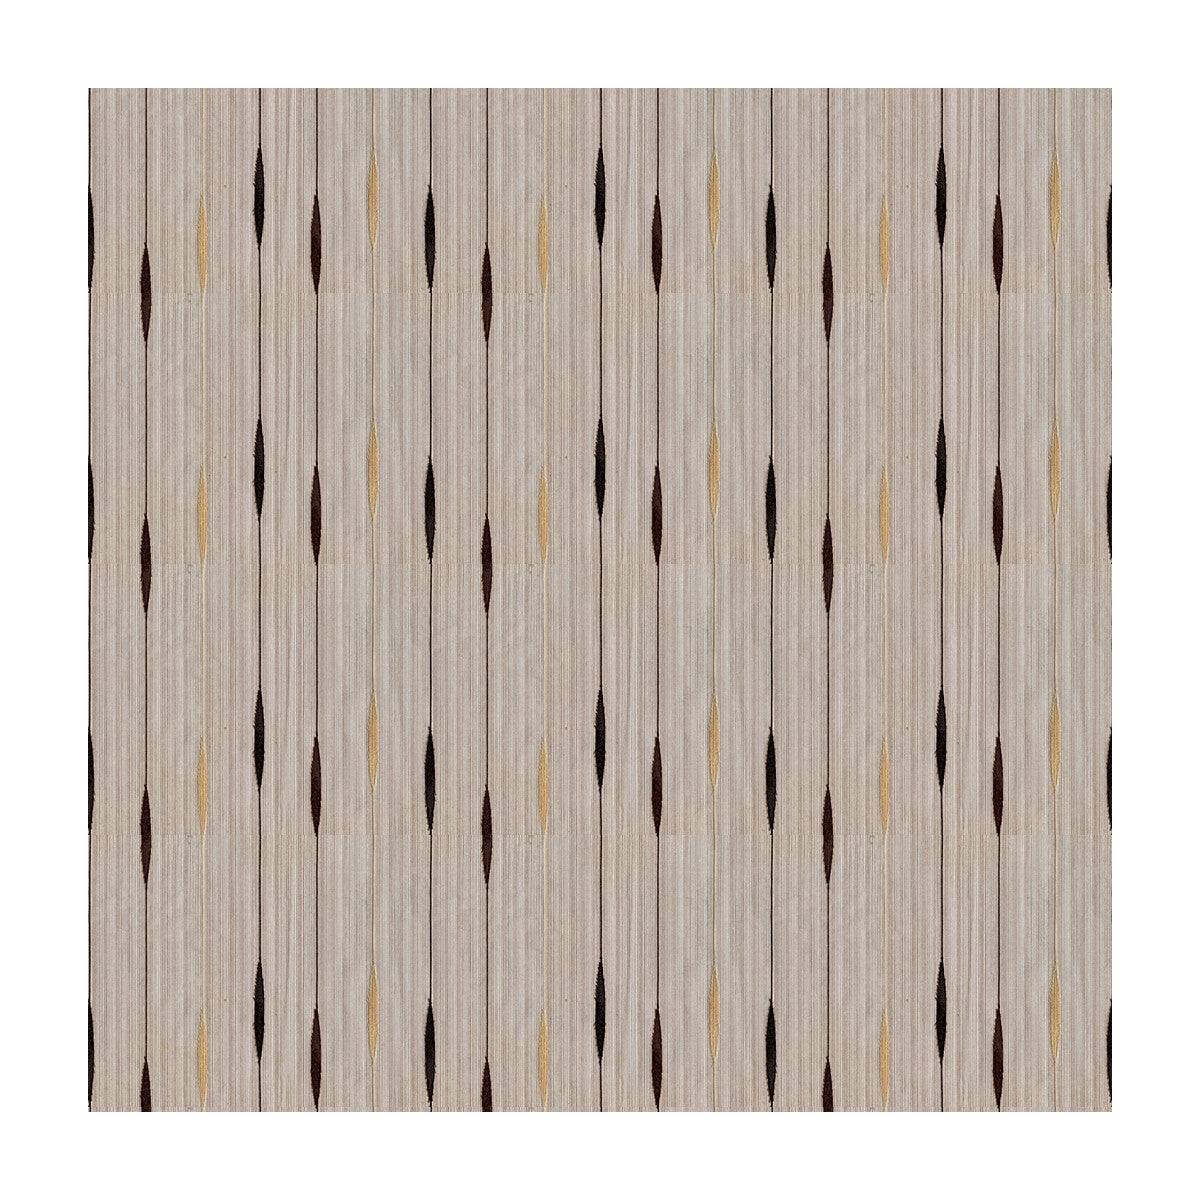 Kravet Contract fabric in 4160-616 color - pattern 4160.616.0 - by Kravet Contract